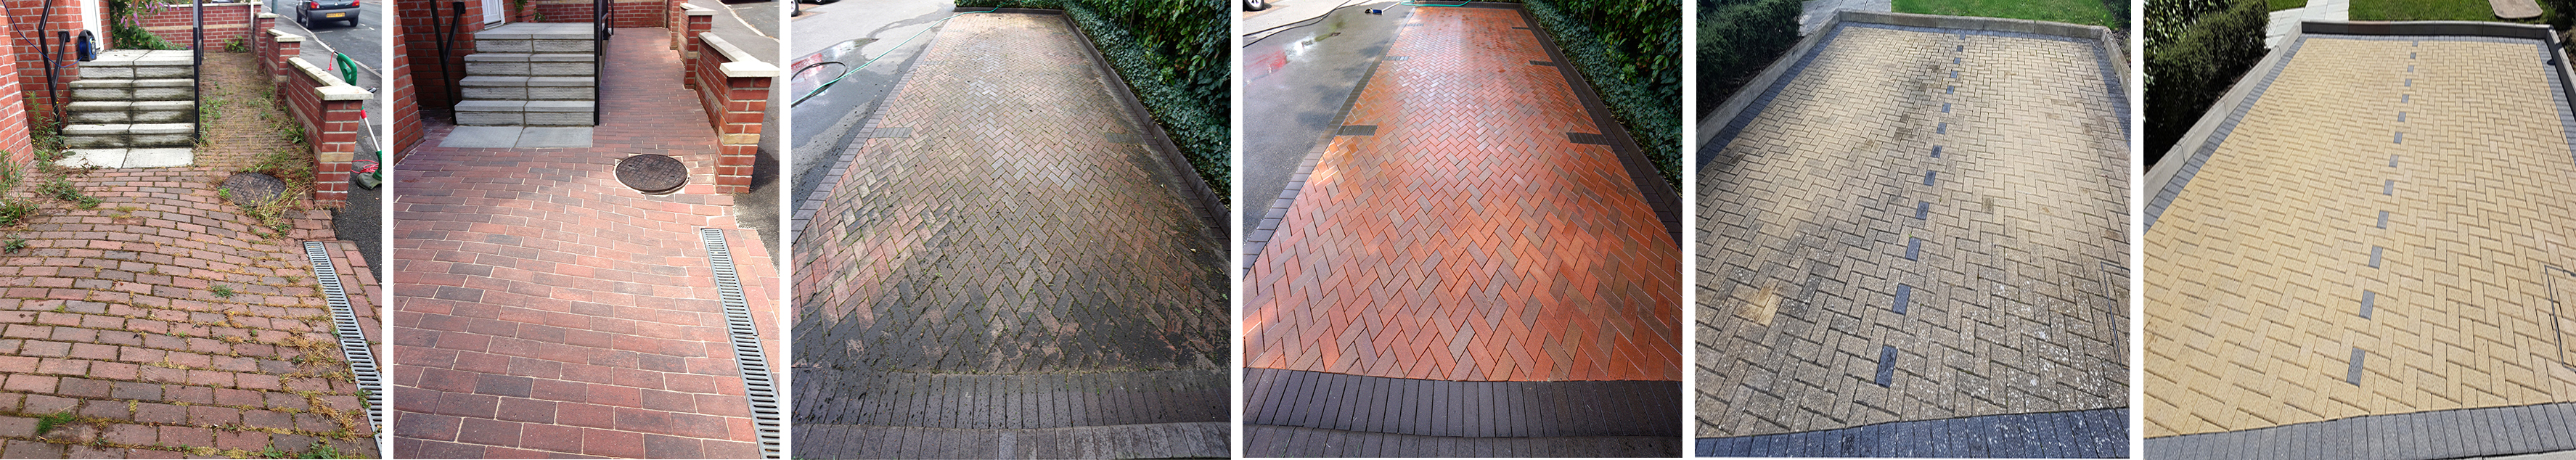 Driveway Cleaning Services in Poole, Dorset